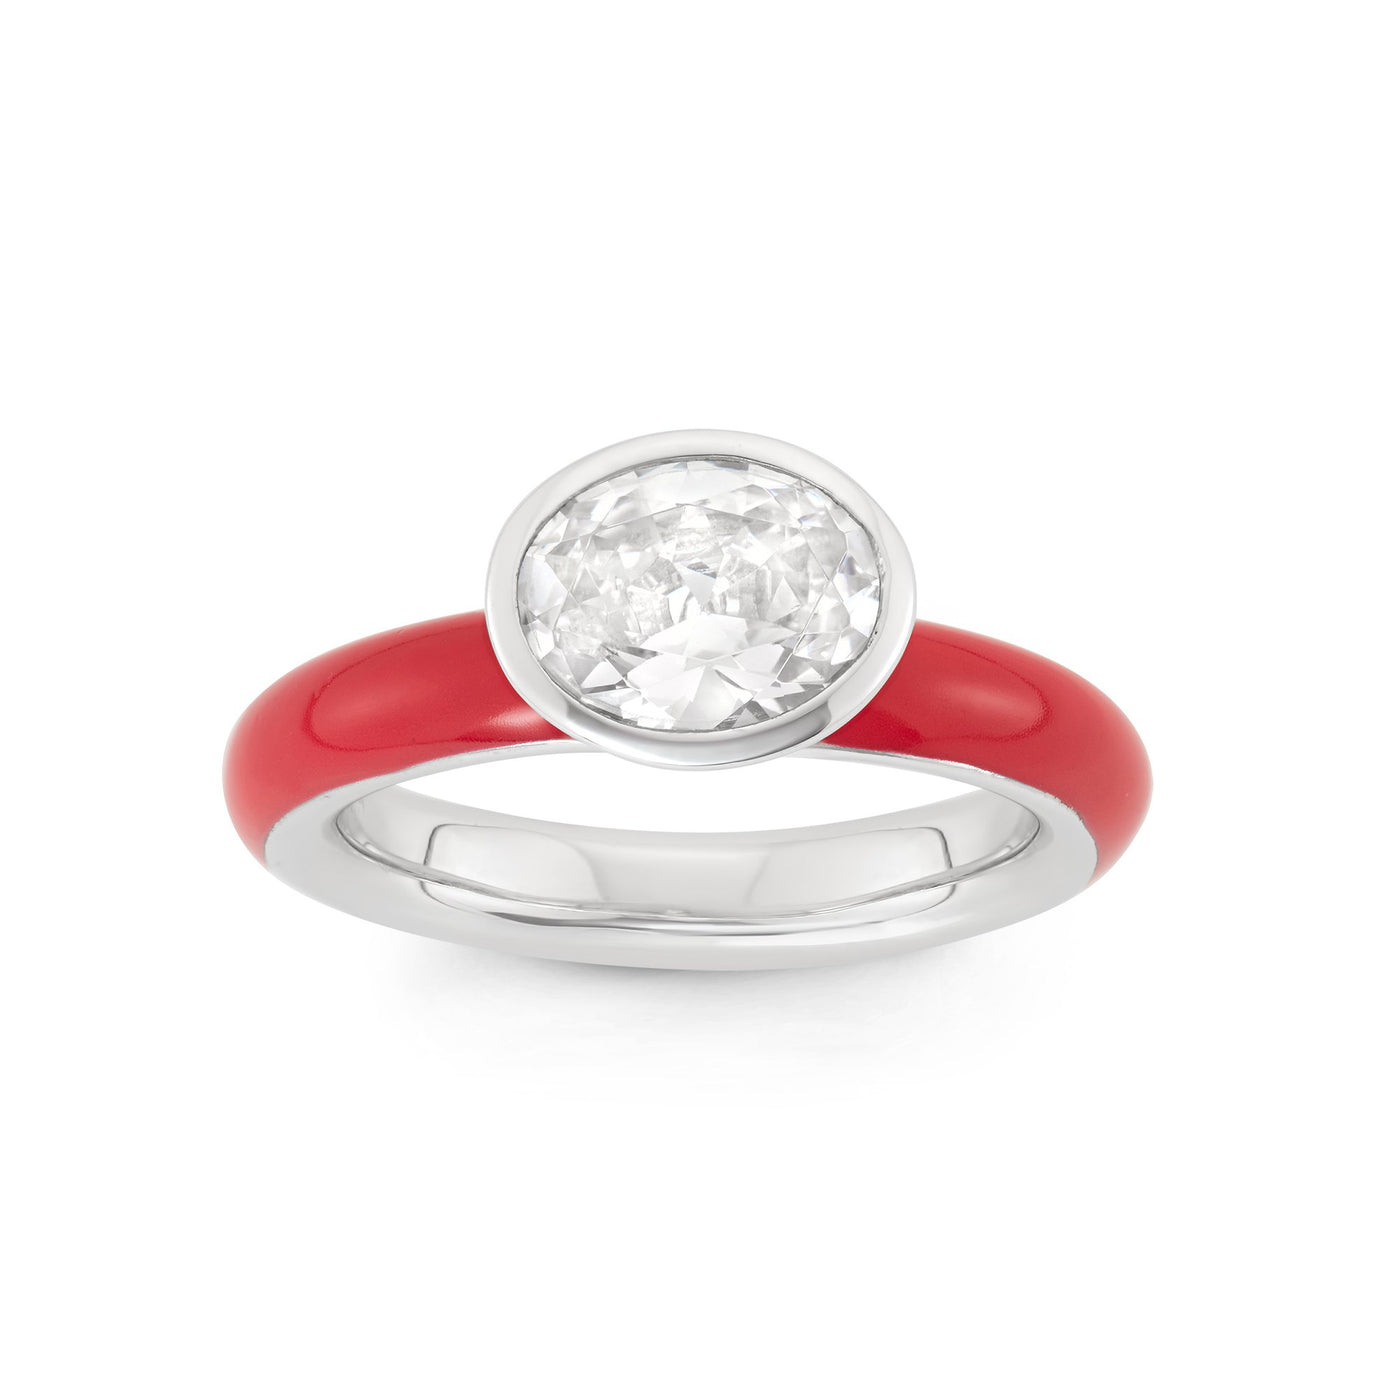 Sterling Silver Spinning Ring With Red Lacquer and White Oval CZ Center Stone